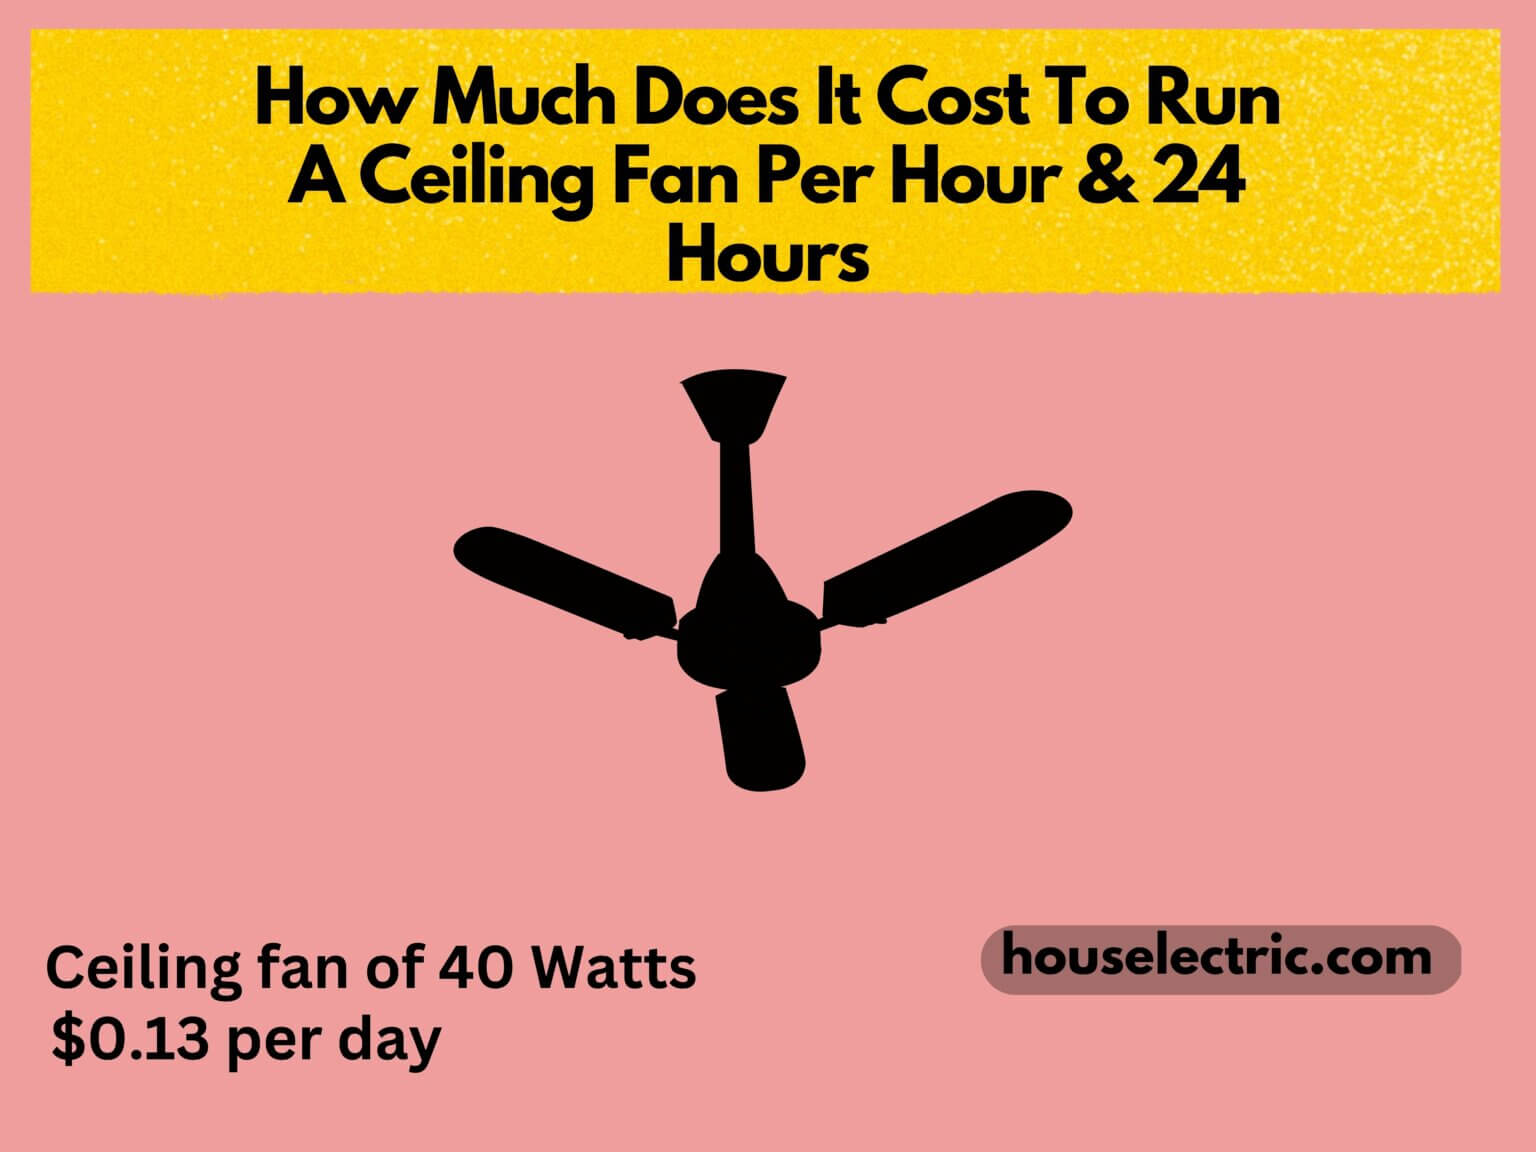 how-much-does-it-cost-to-run-a-ceiling-fan-per-hour-24-hours